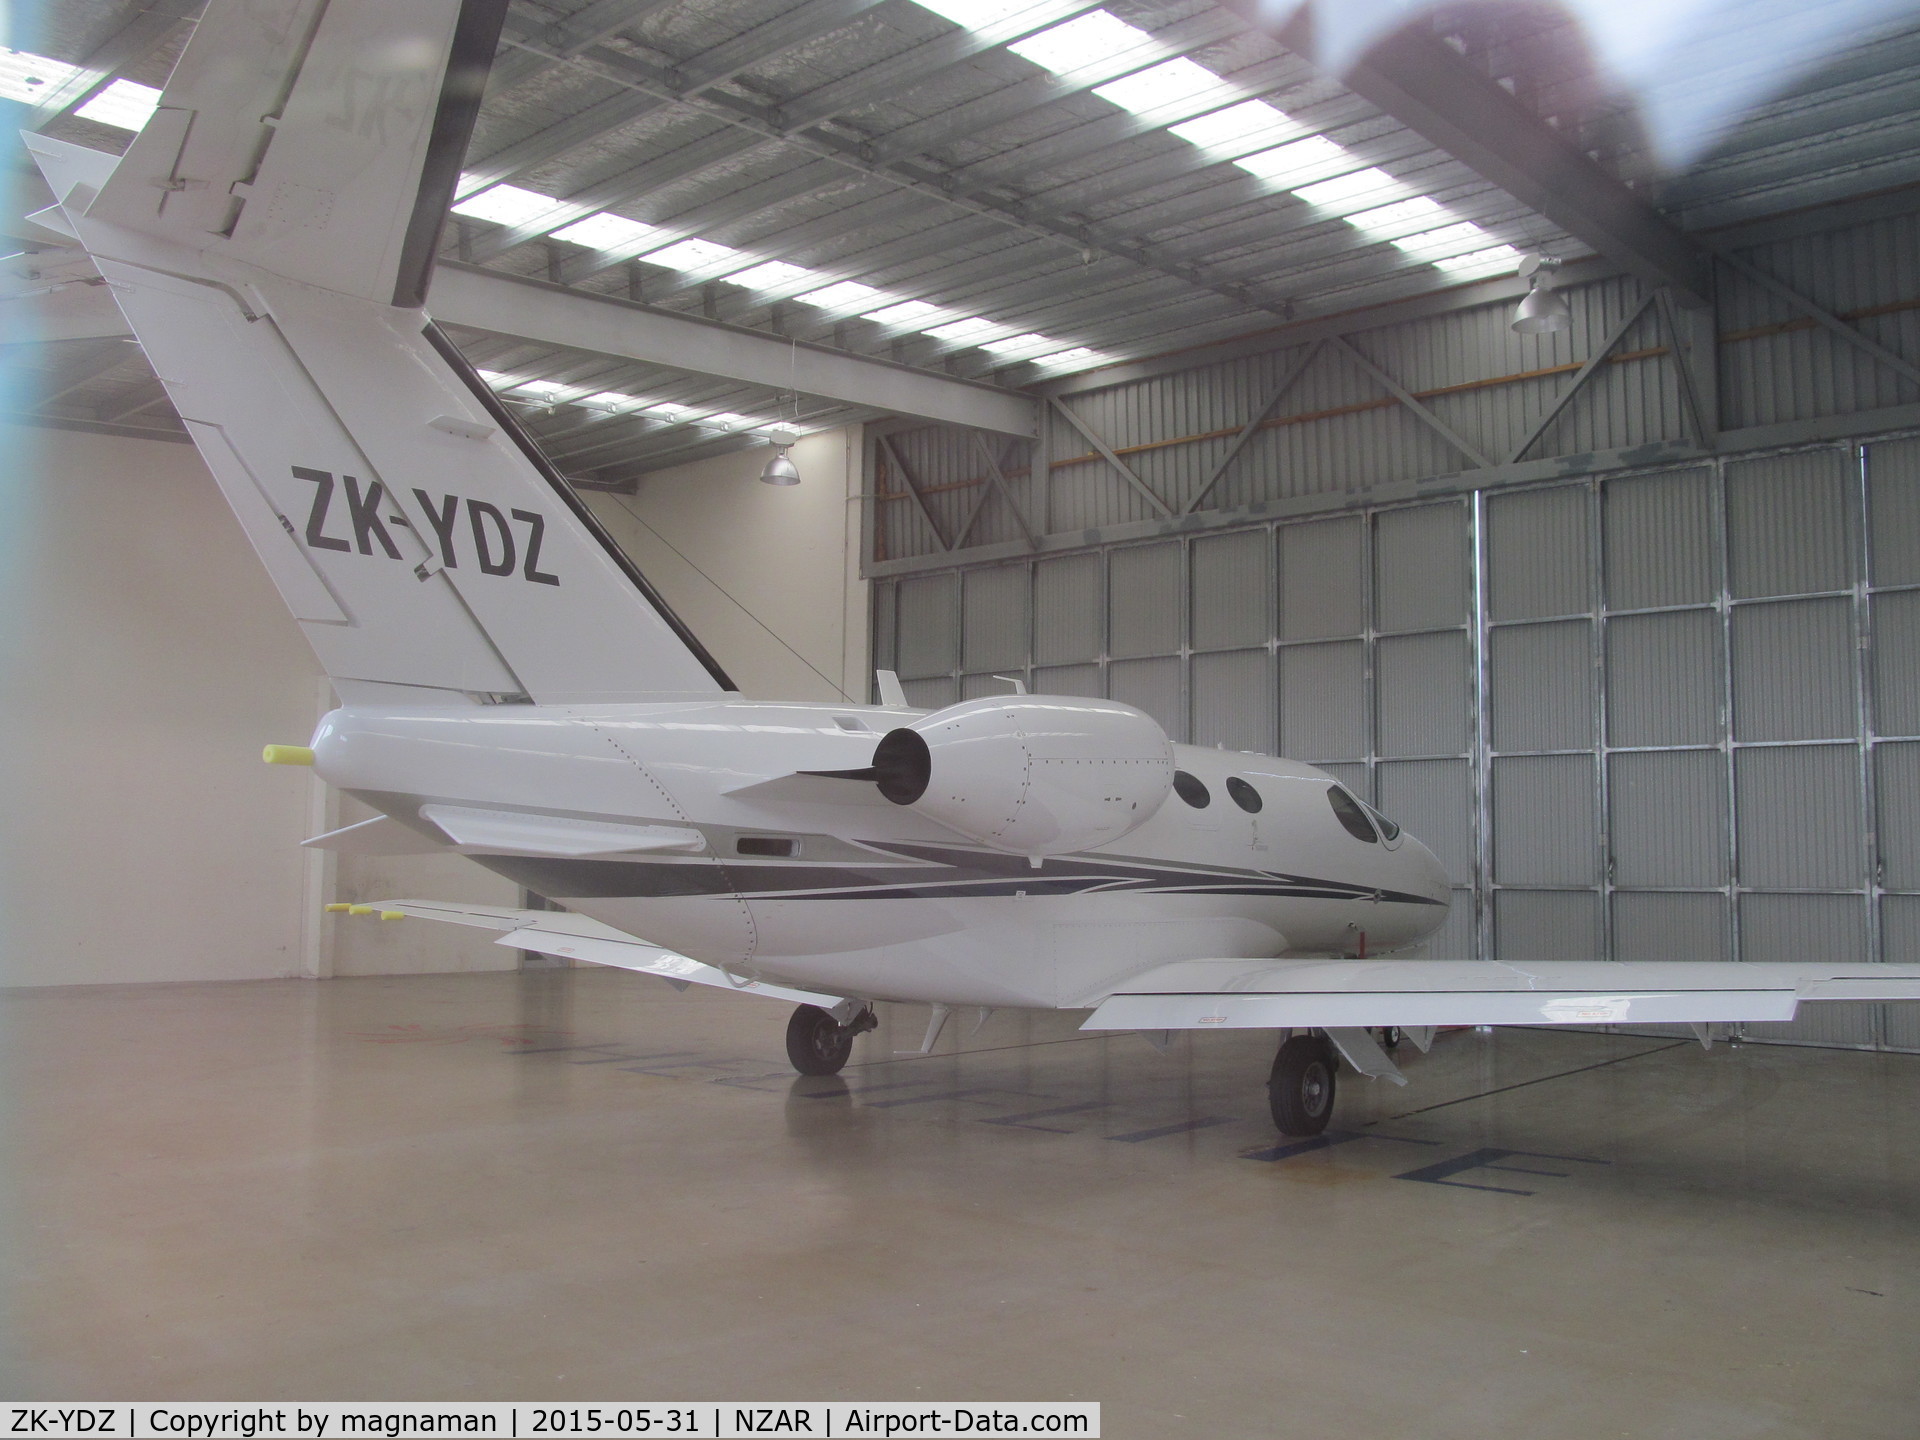 ZK-YDZ, 2008 Cessna 510 Citation Mustang Citation Mustang C/N 510-0070, Hiding in owner's hangar at Ardmore - ex VH-YDZ so no expense spared on painting new registration!!